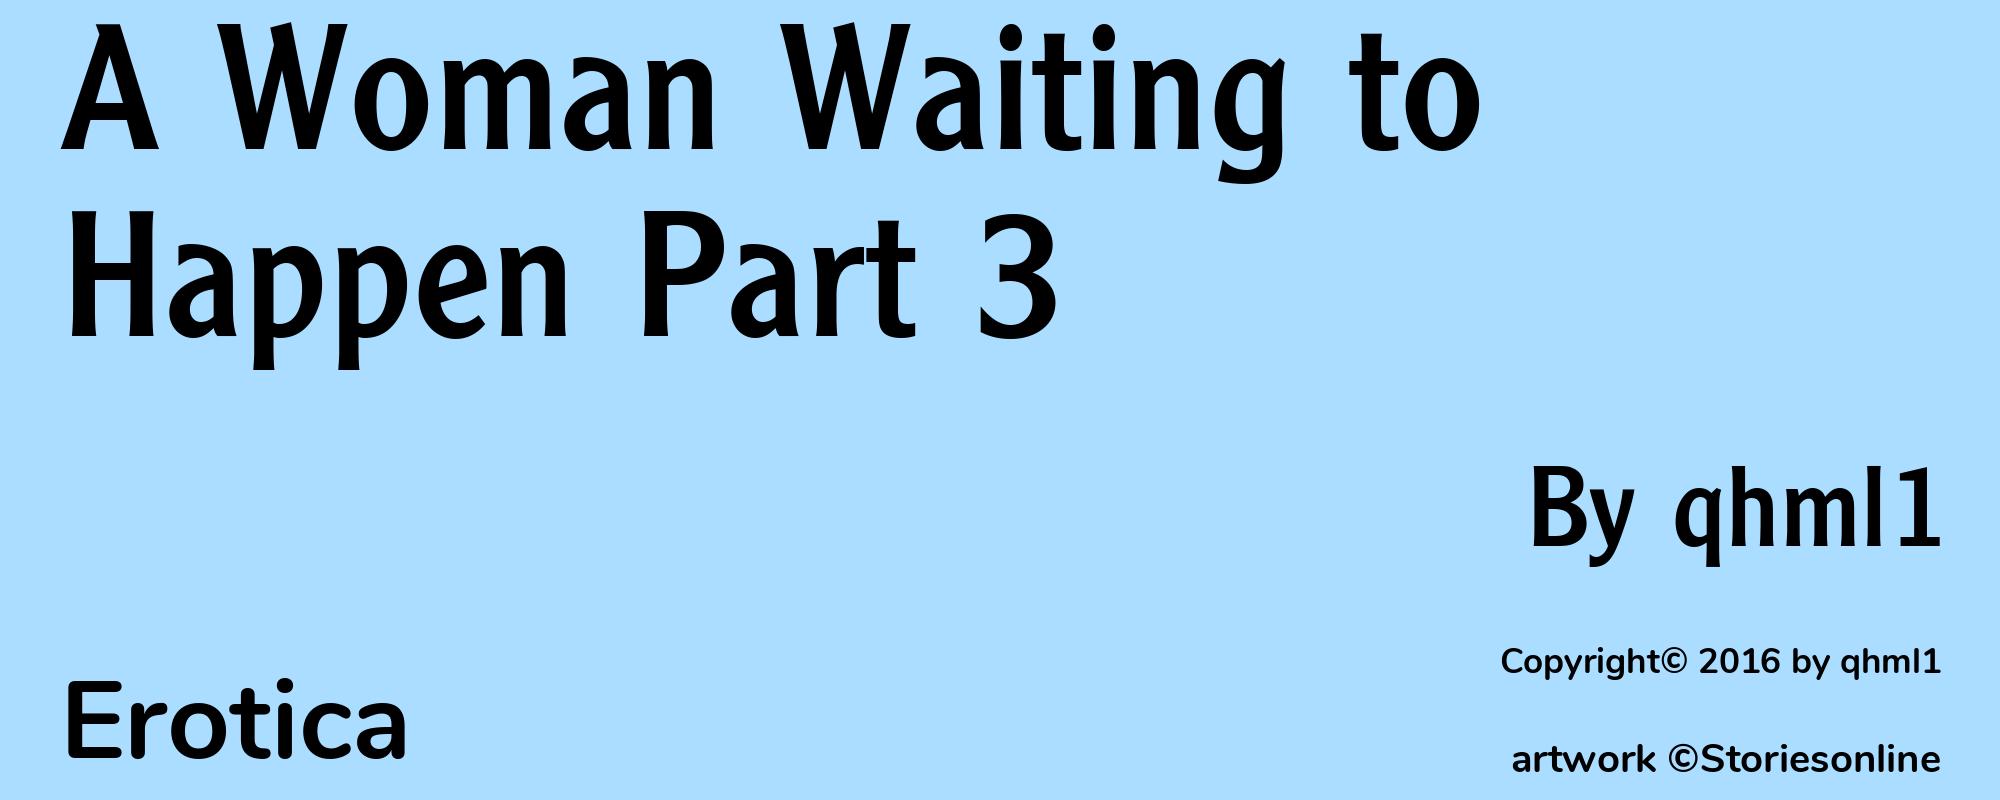 A Woman Waiting to Happen Part 3 - Cover